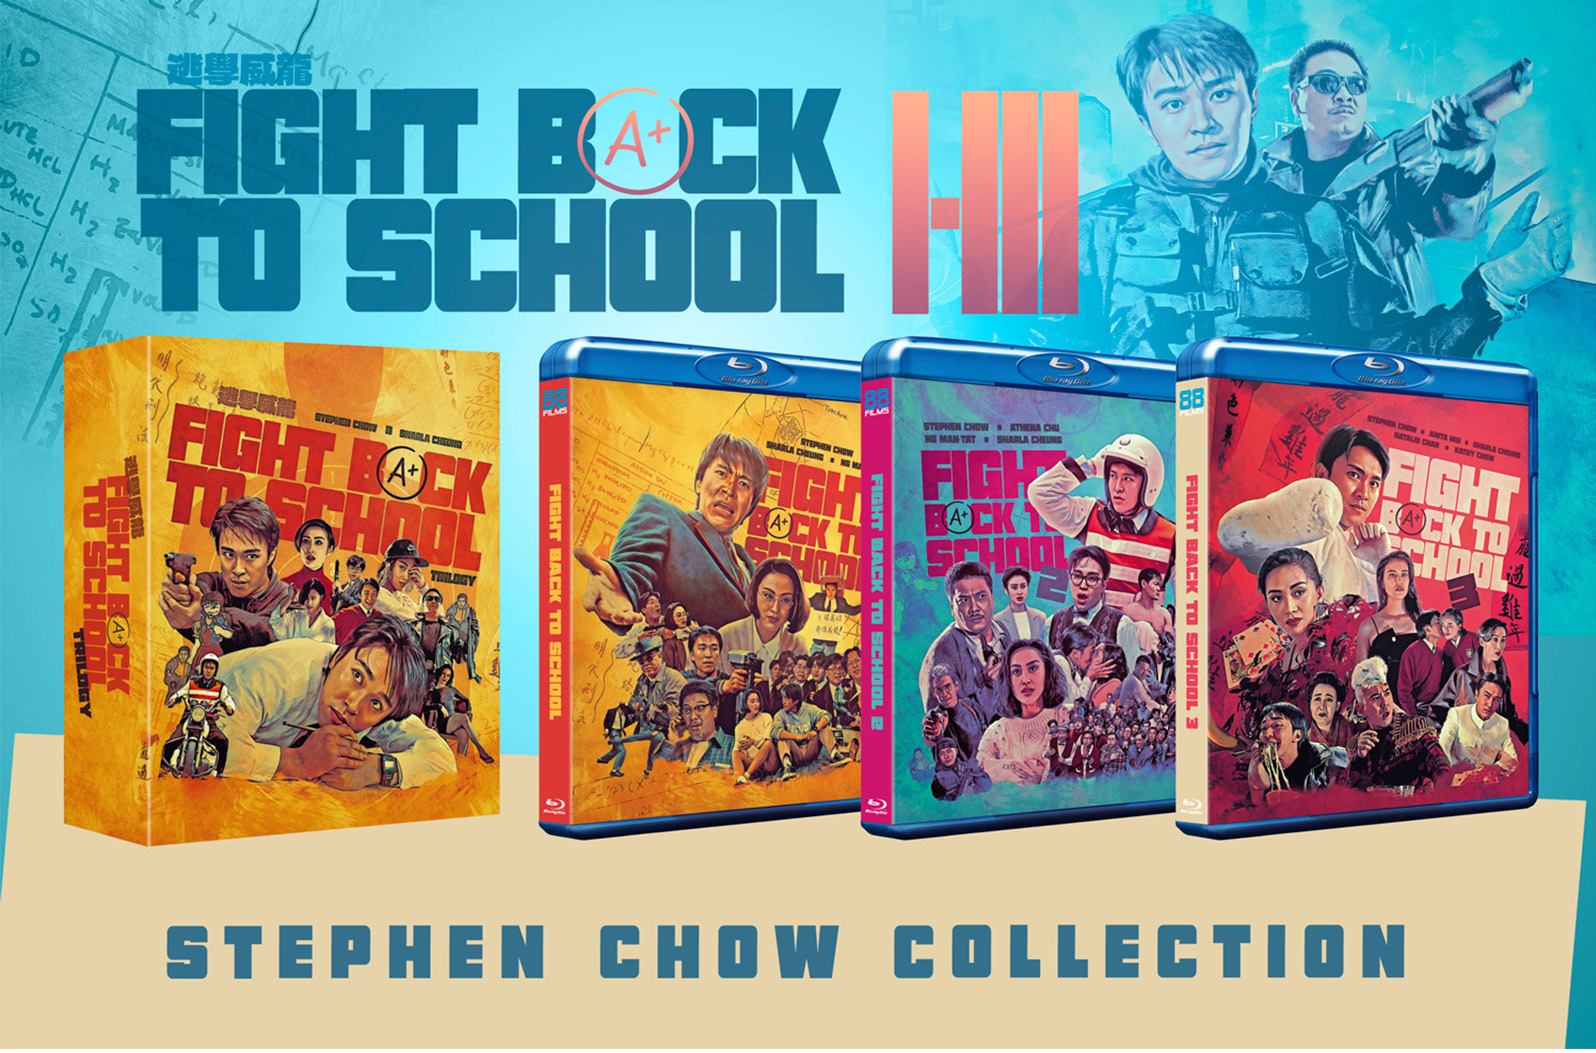 Fight Back To School Trilogy - Stephen Chow Collection